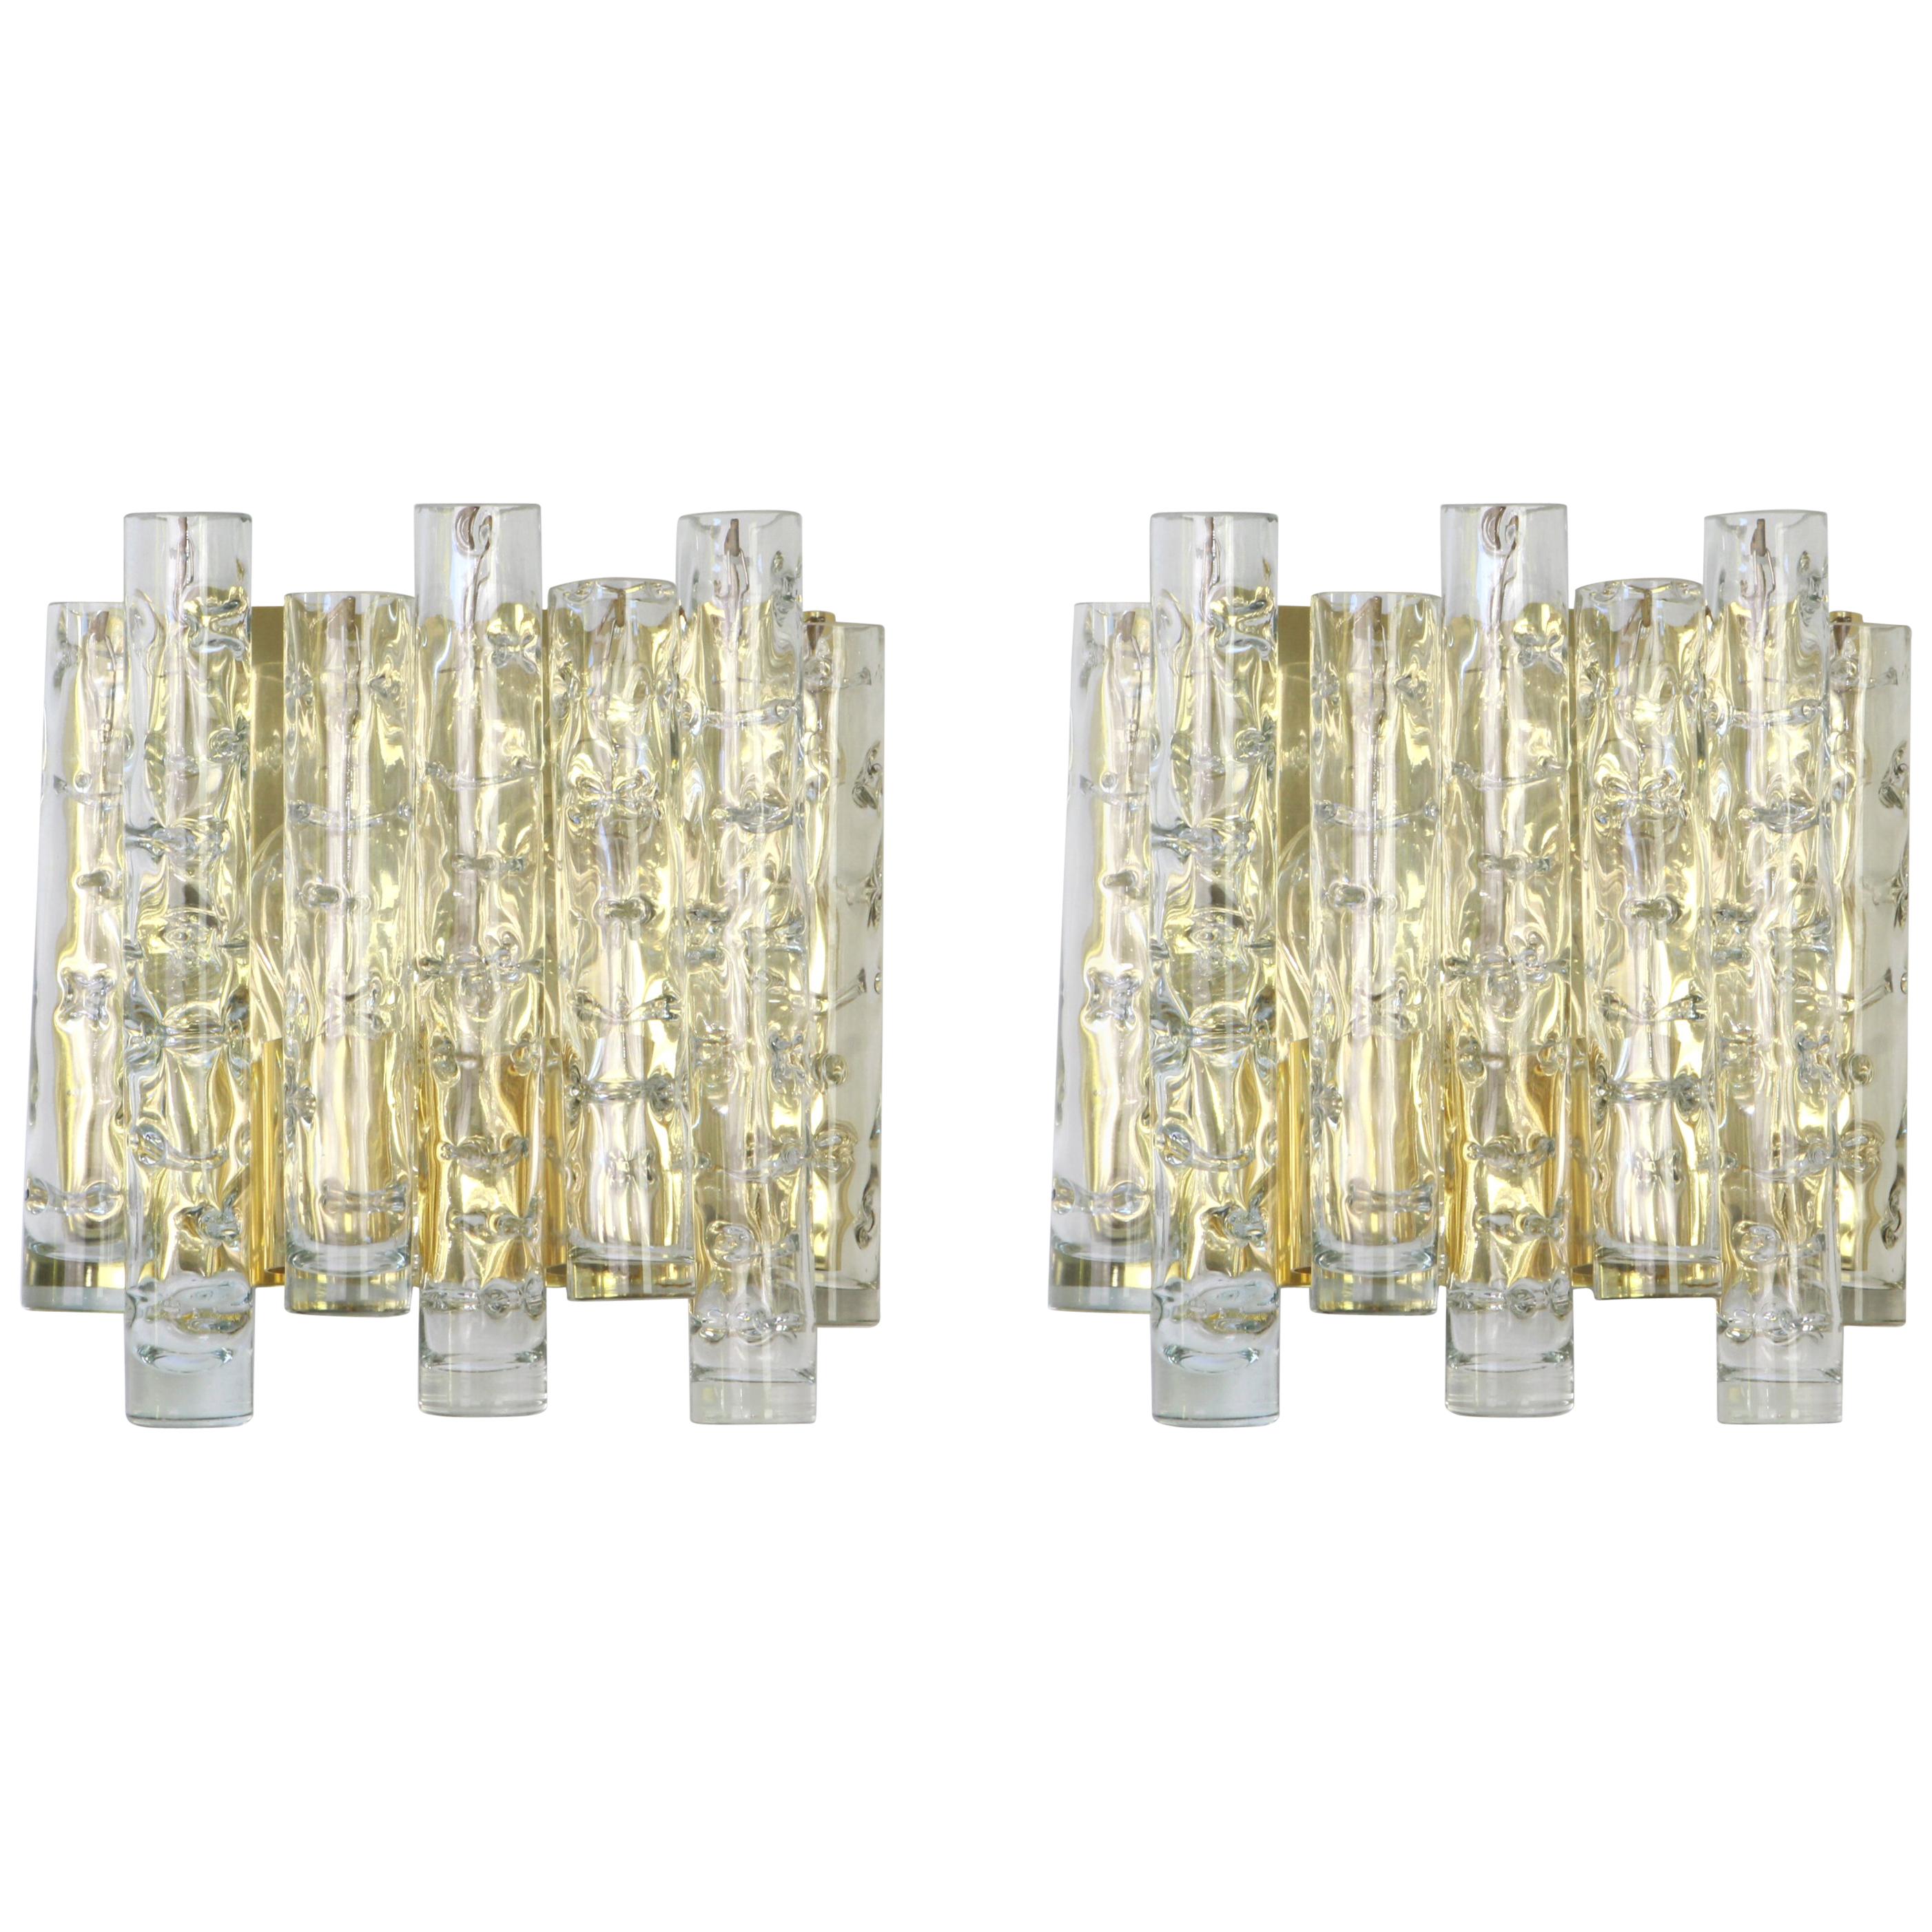 Pair of Large Murano Glass Wall Sconces by Doria, Germany, 1960s For Sale